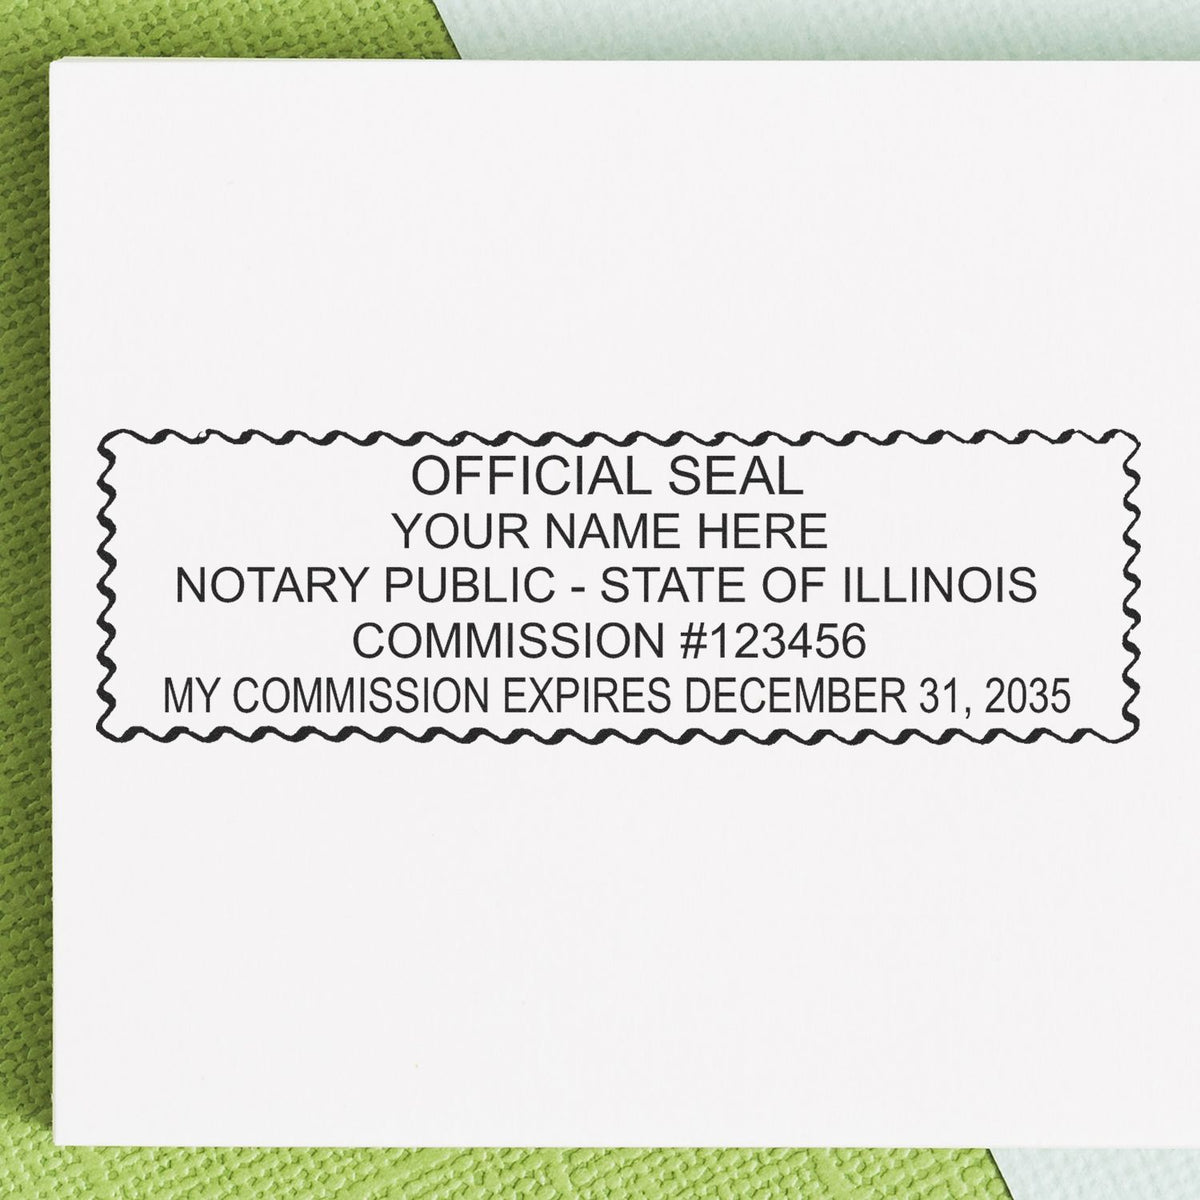 A photograph of the Heavy-Duty Illinois Rectangular Notary Stamp stamp impression reveals a vivid, professional image of the on paper.